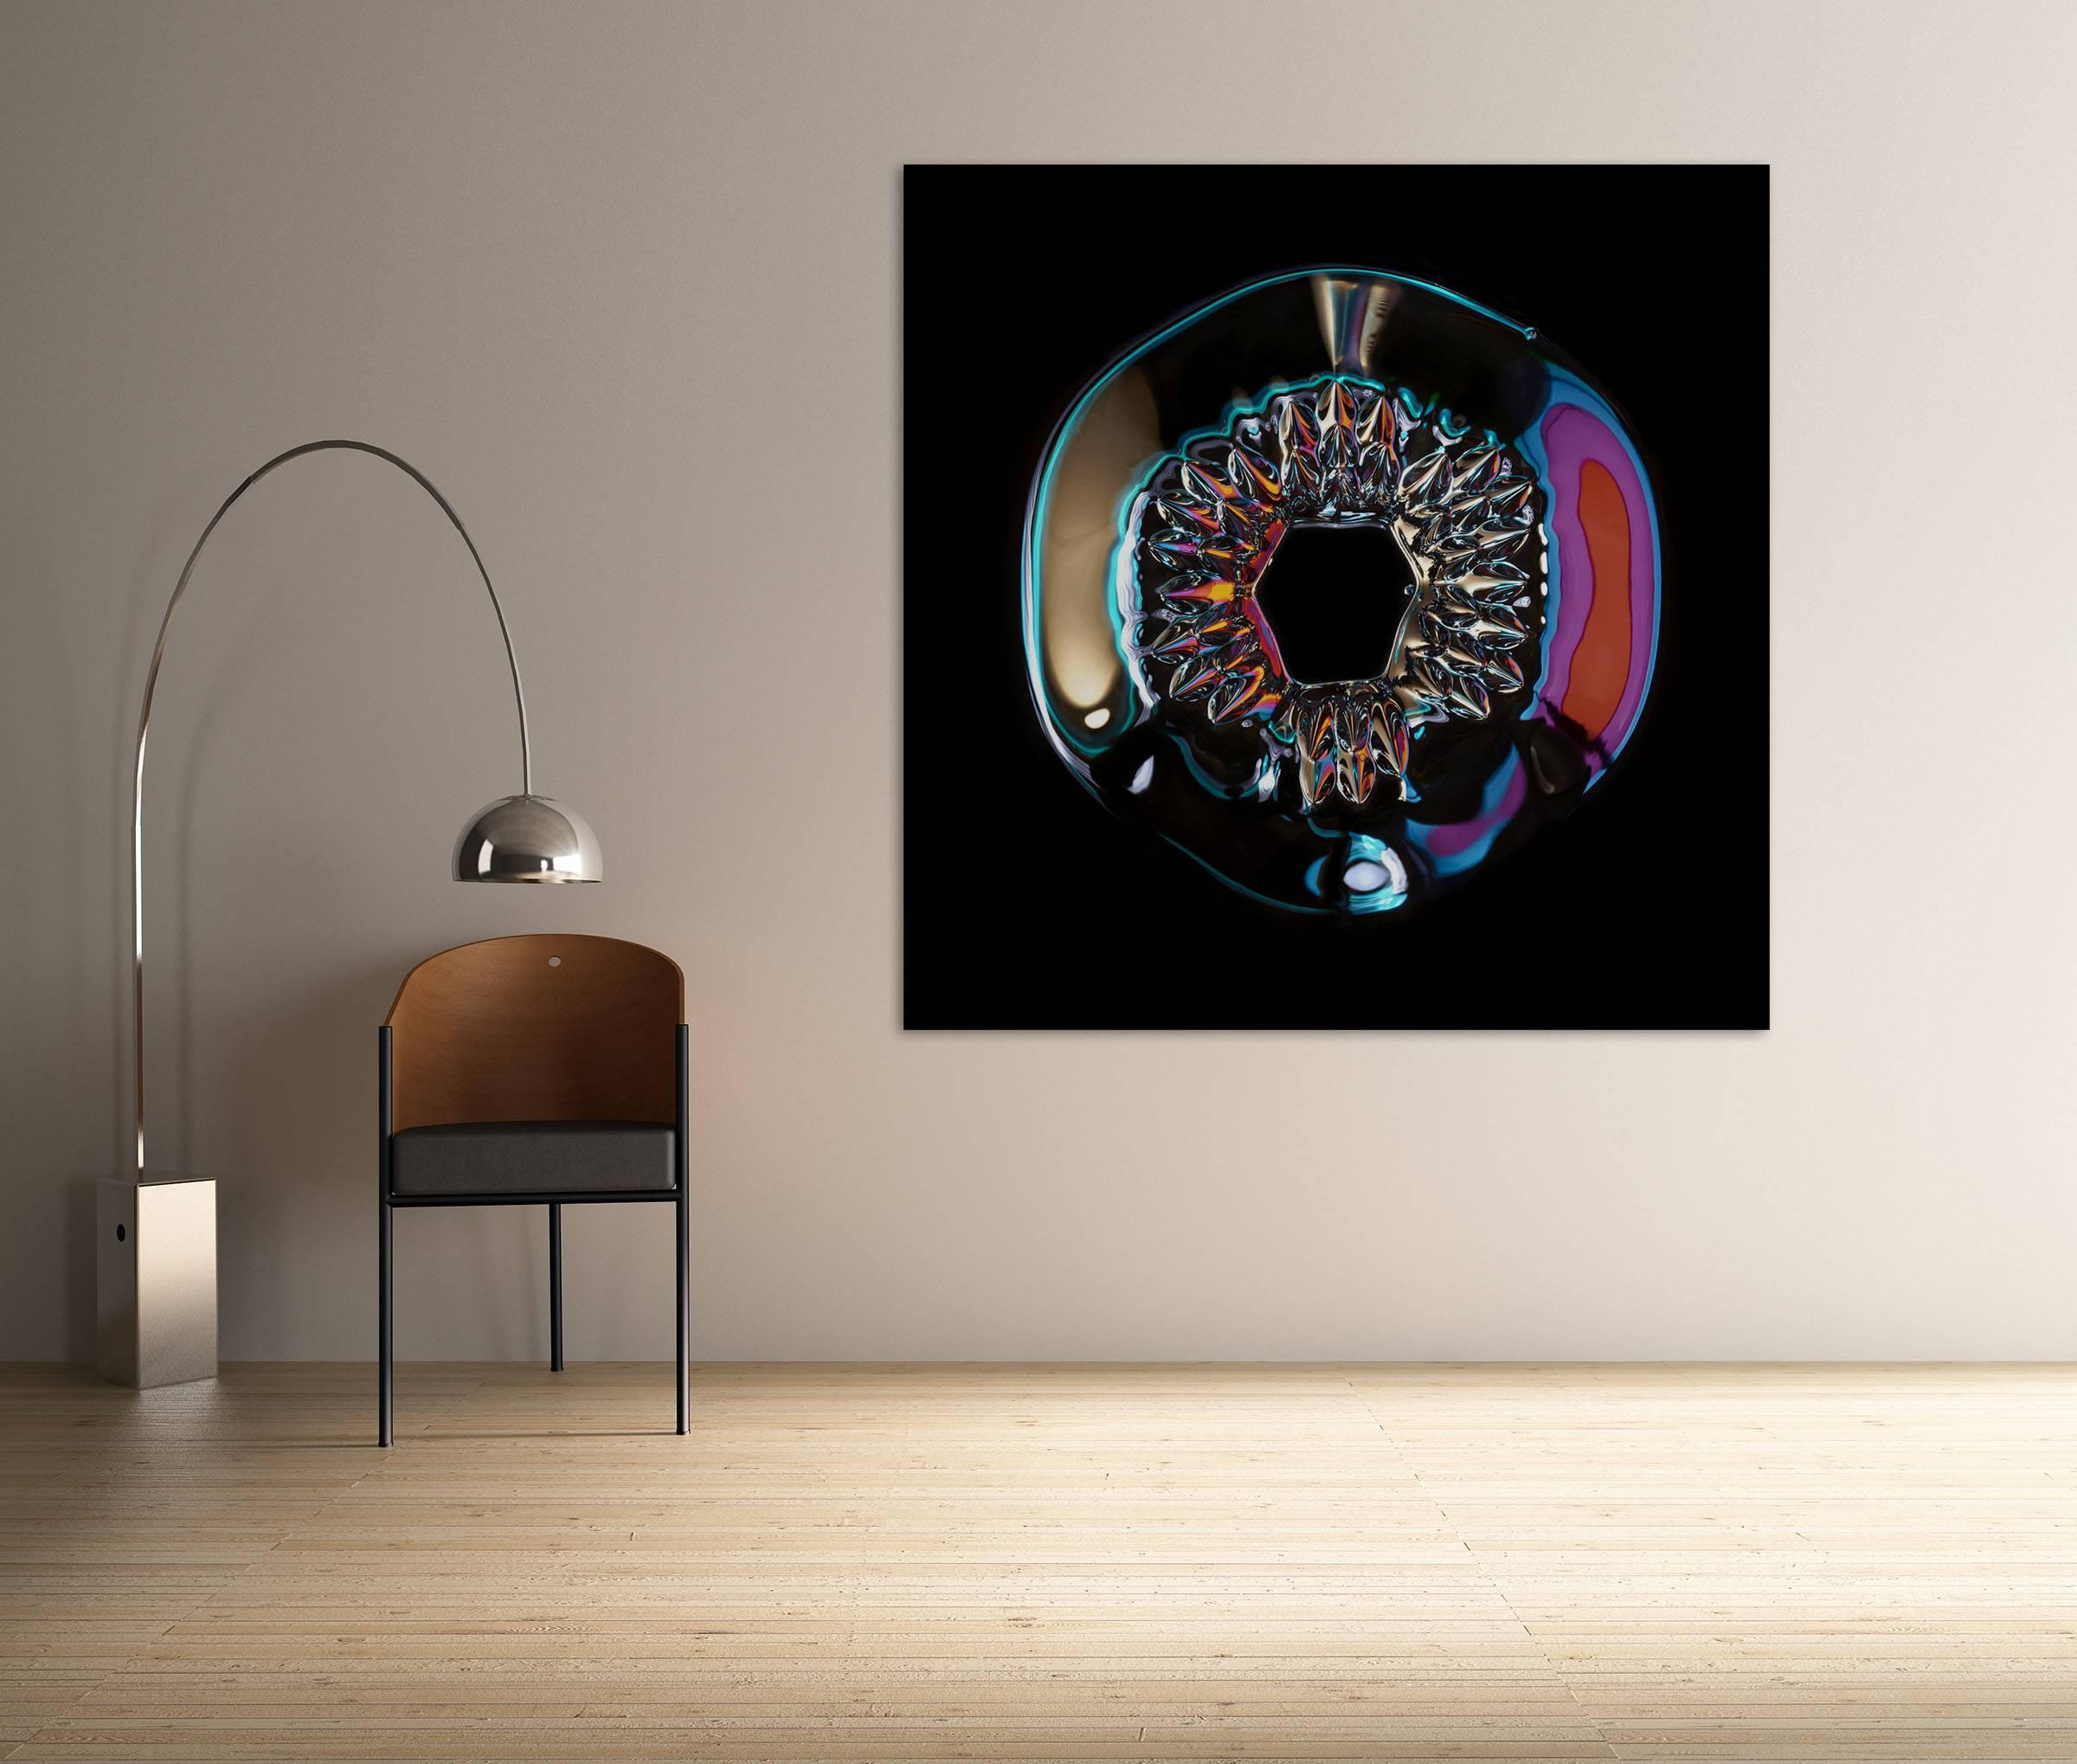 Magnetic radiation 11 (Abstract Photography)

Chromogenic print. Edition 2/5.

In his Magnetic radiation series, Janiak reveals the hidden world of magnetism by photographing ferrofluids. A ferrofluid is a liquid substance magnetized through the